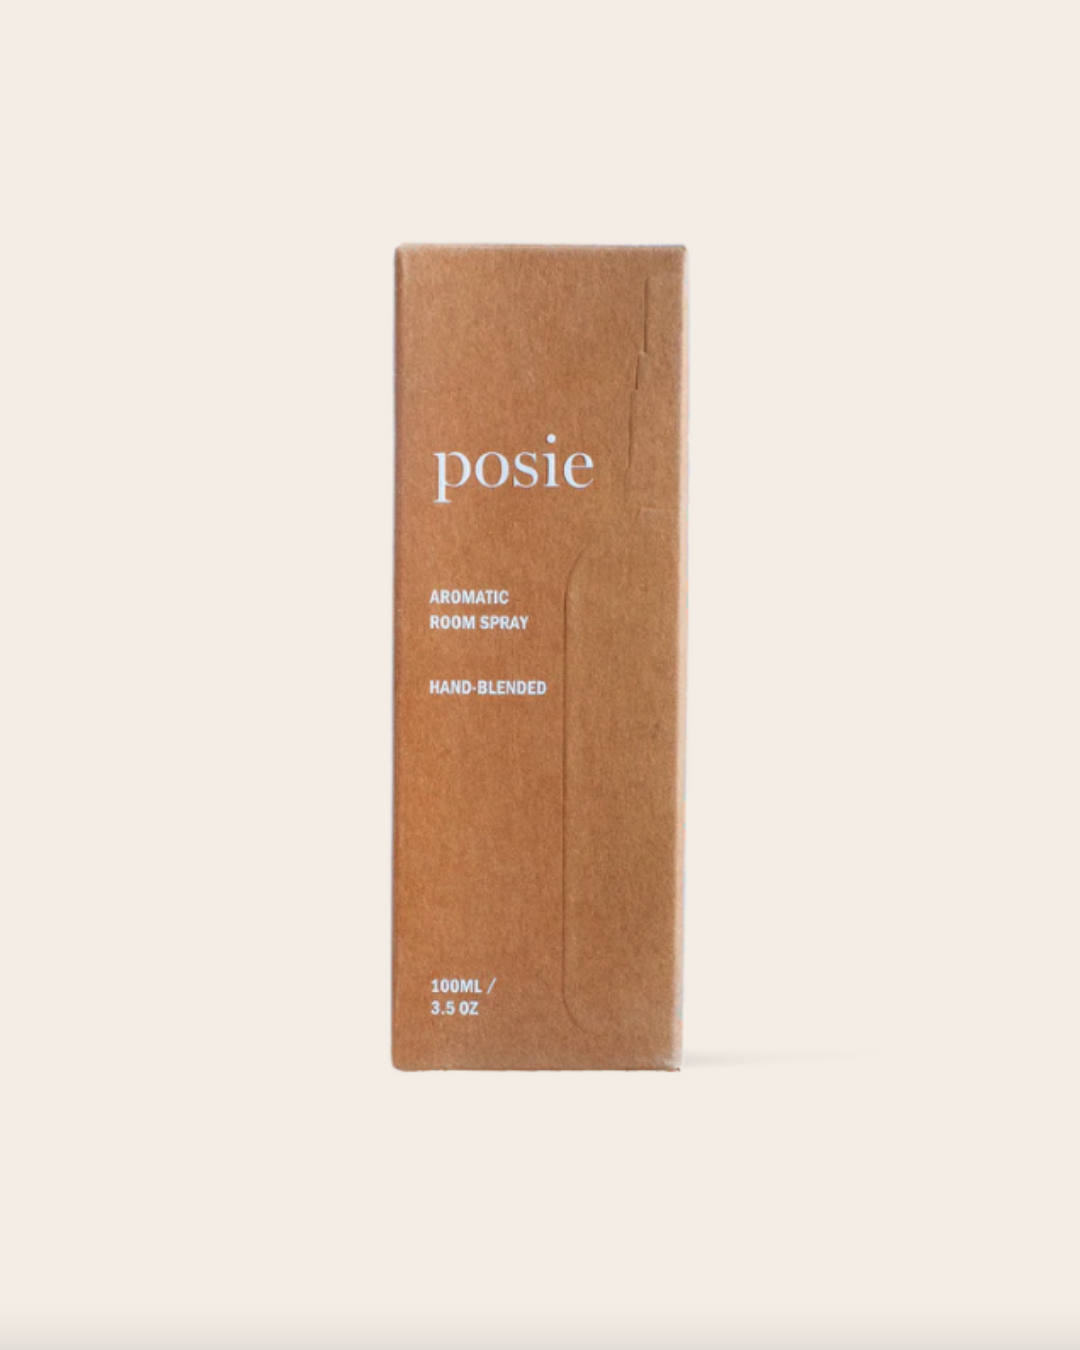 Sur: Cedarwood / Amber / Patchouli Aromatic Room Spray Candles by We Are Posie - Prae Wellness